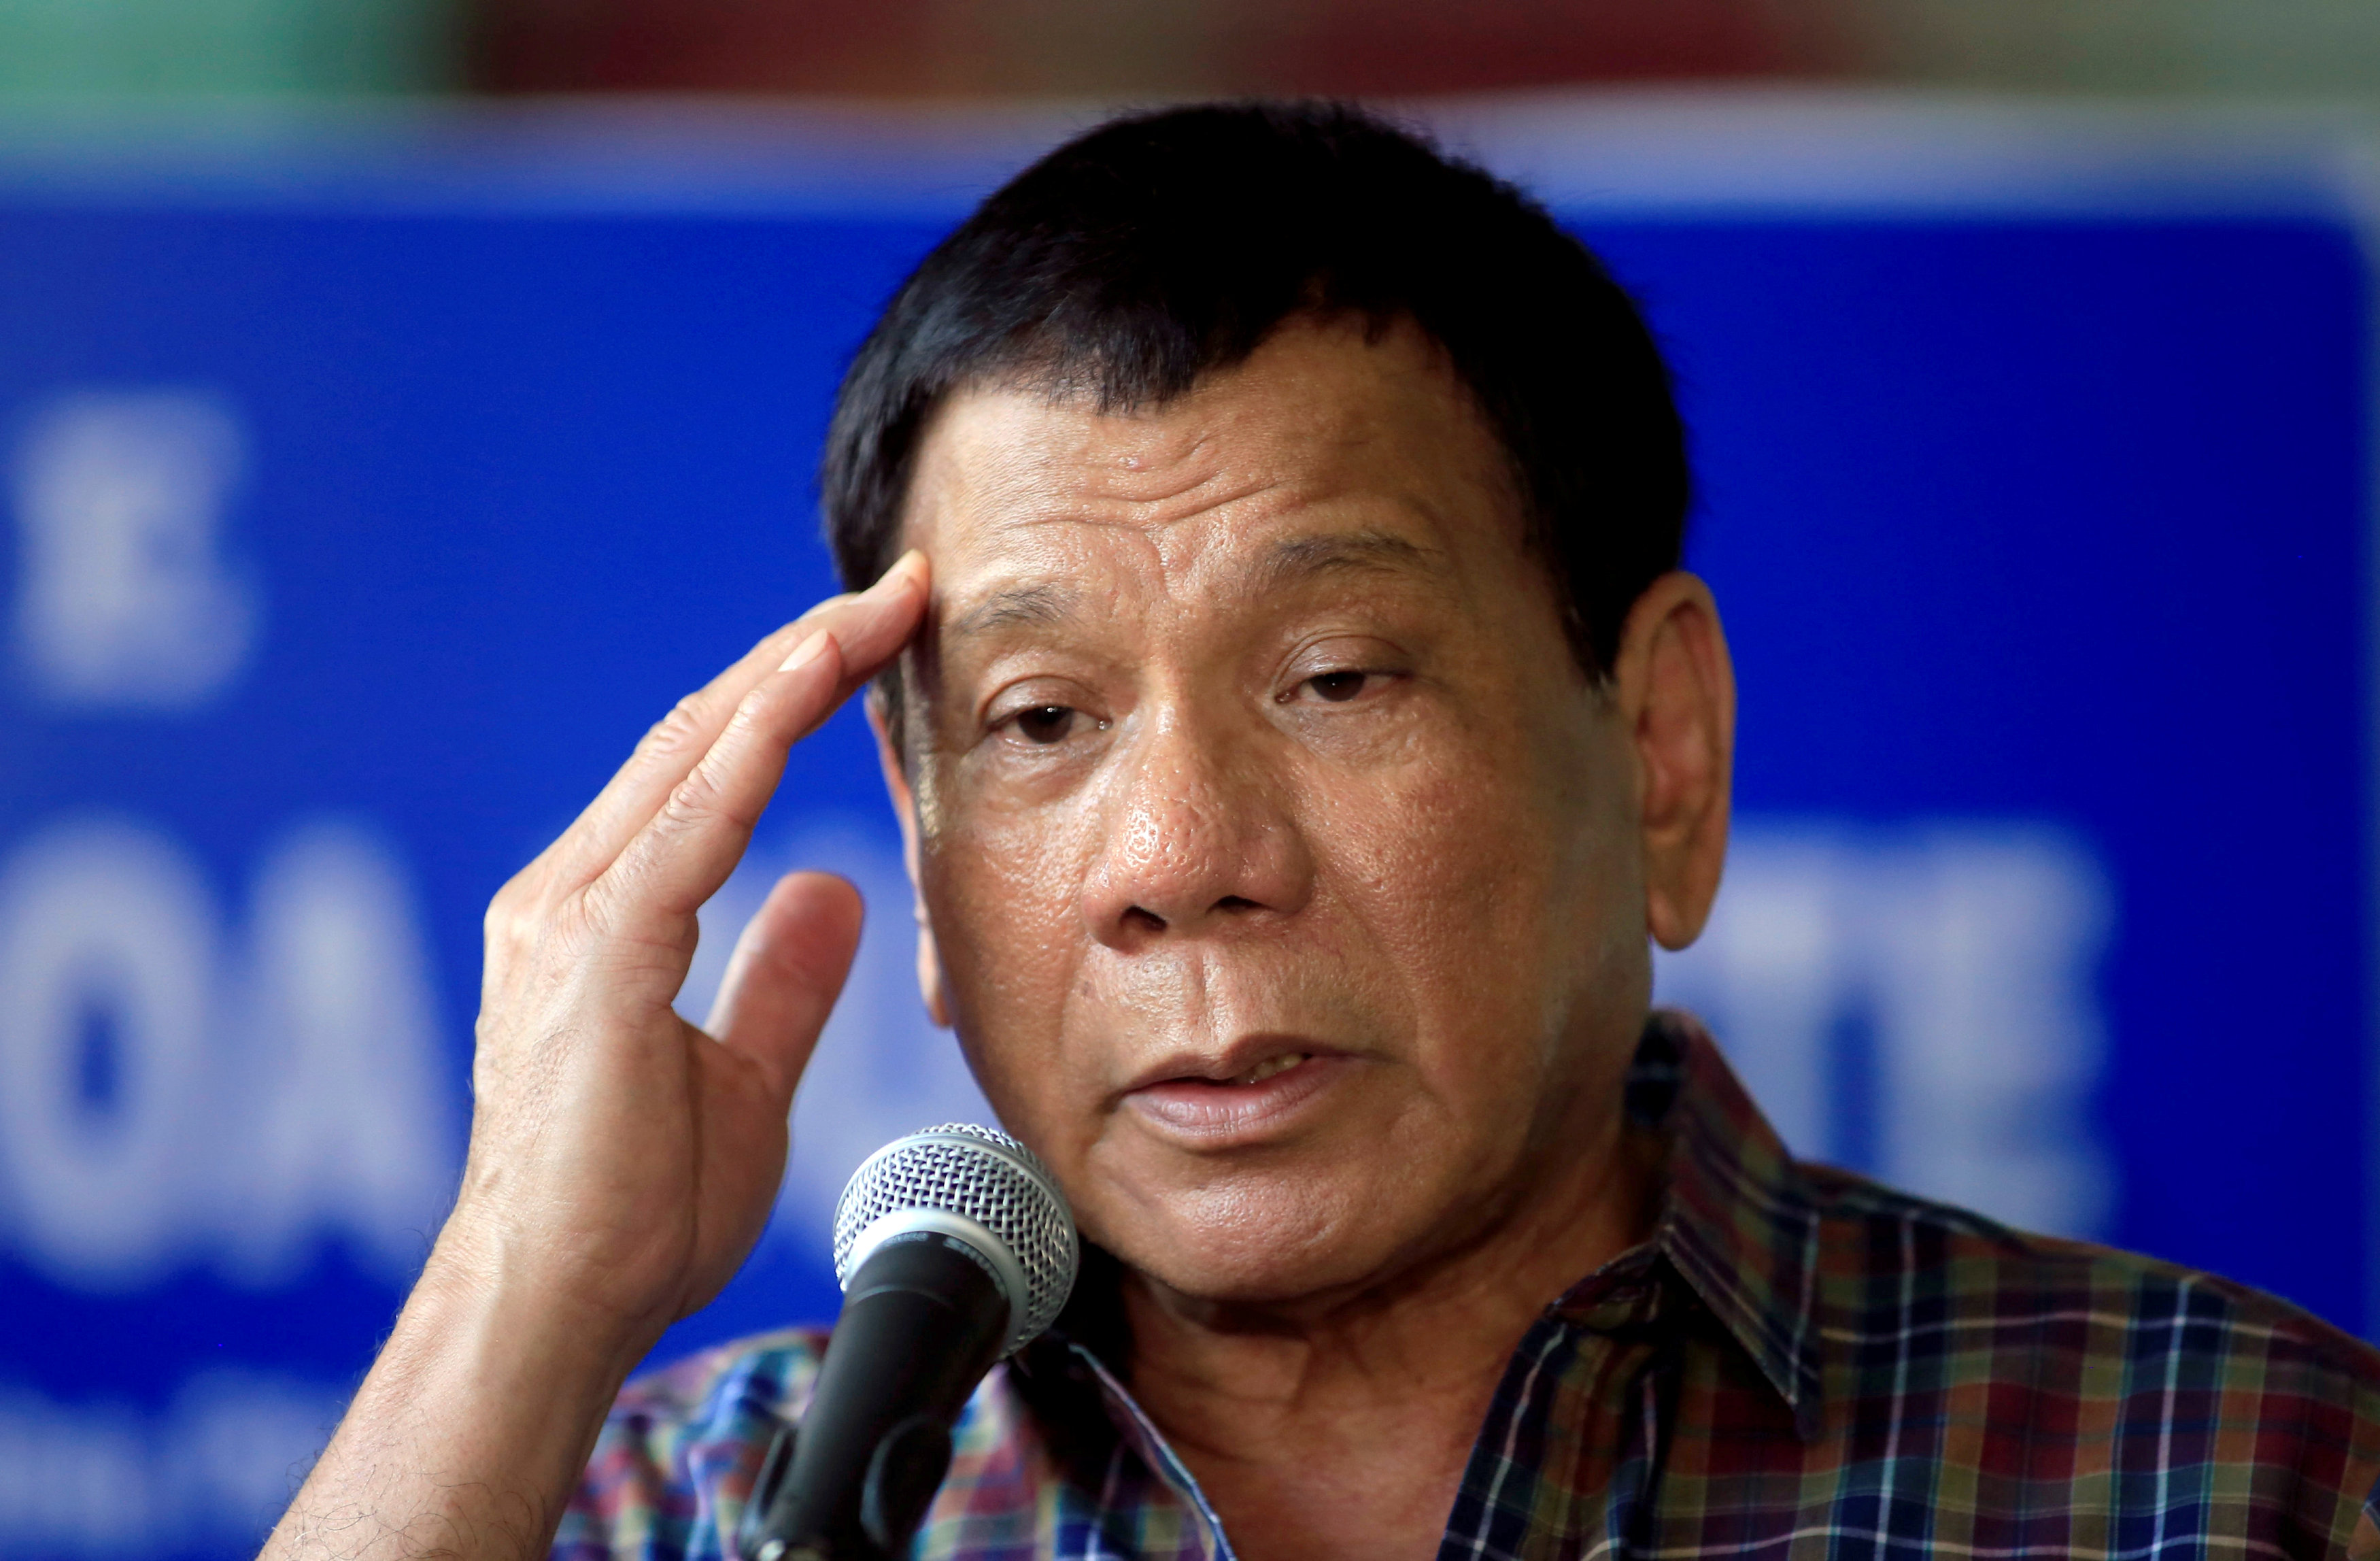 Health rumours: Duterte 'alive and well', says Philippines